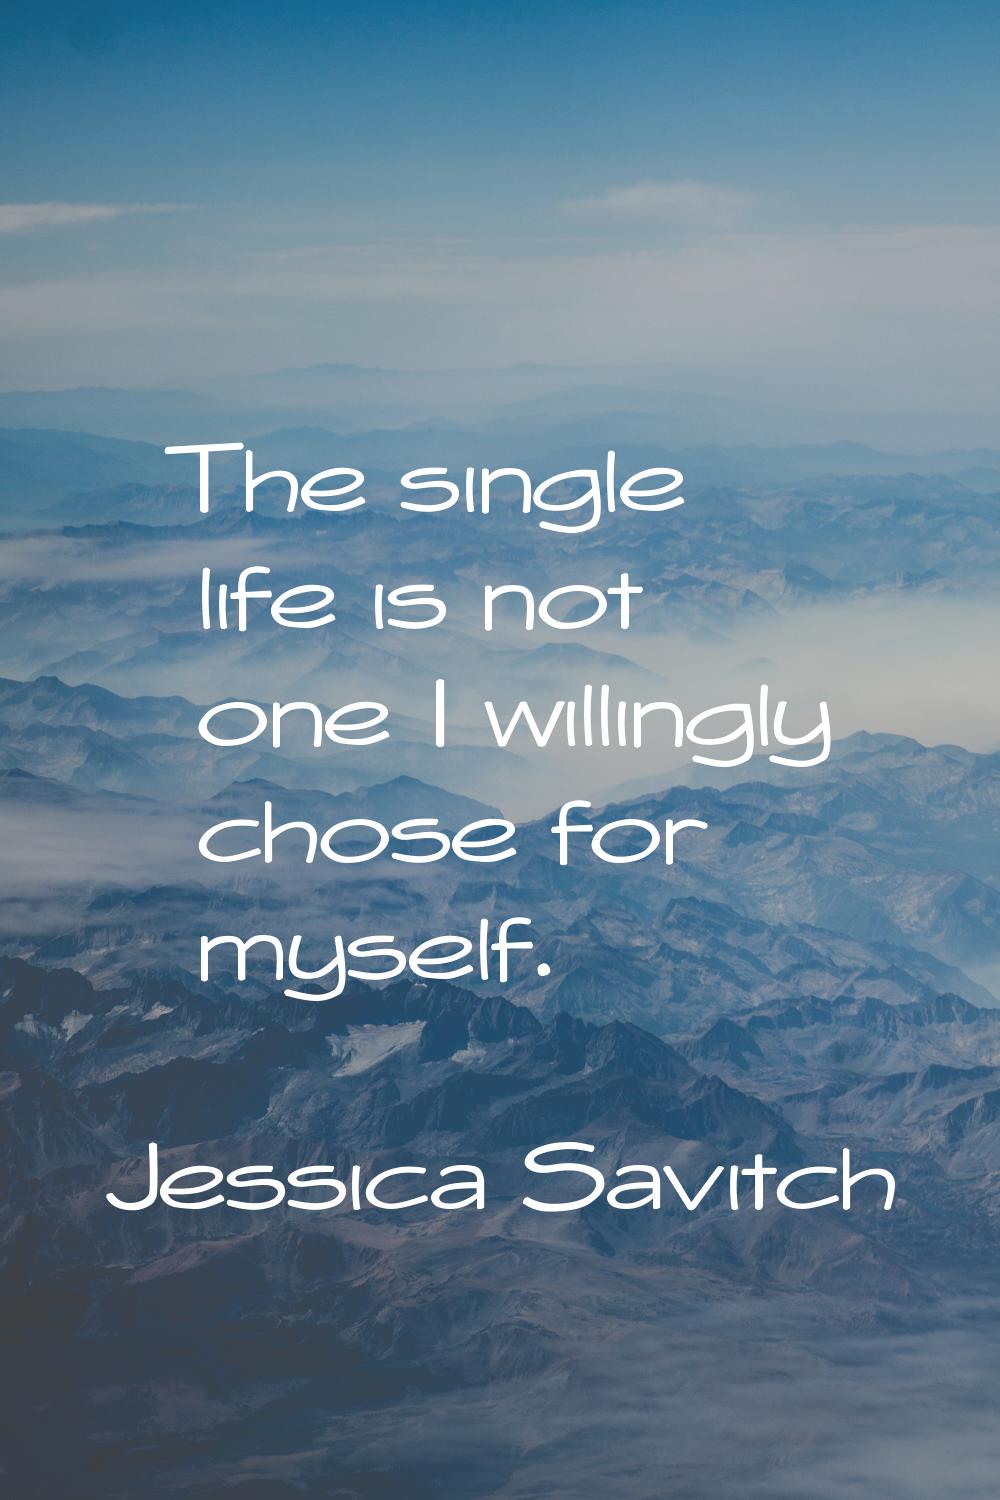 The single life is not one I willingly chose for myself.